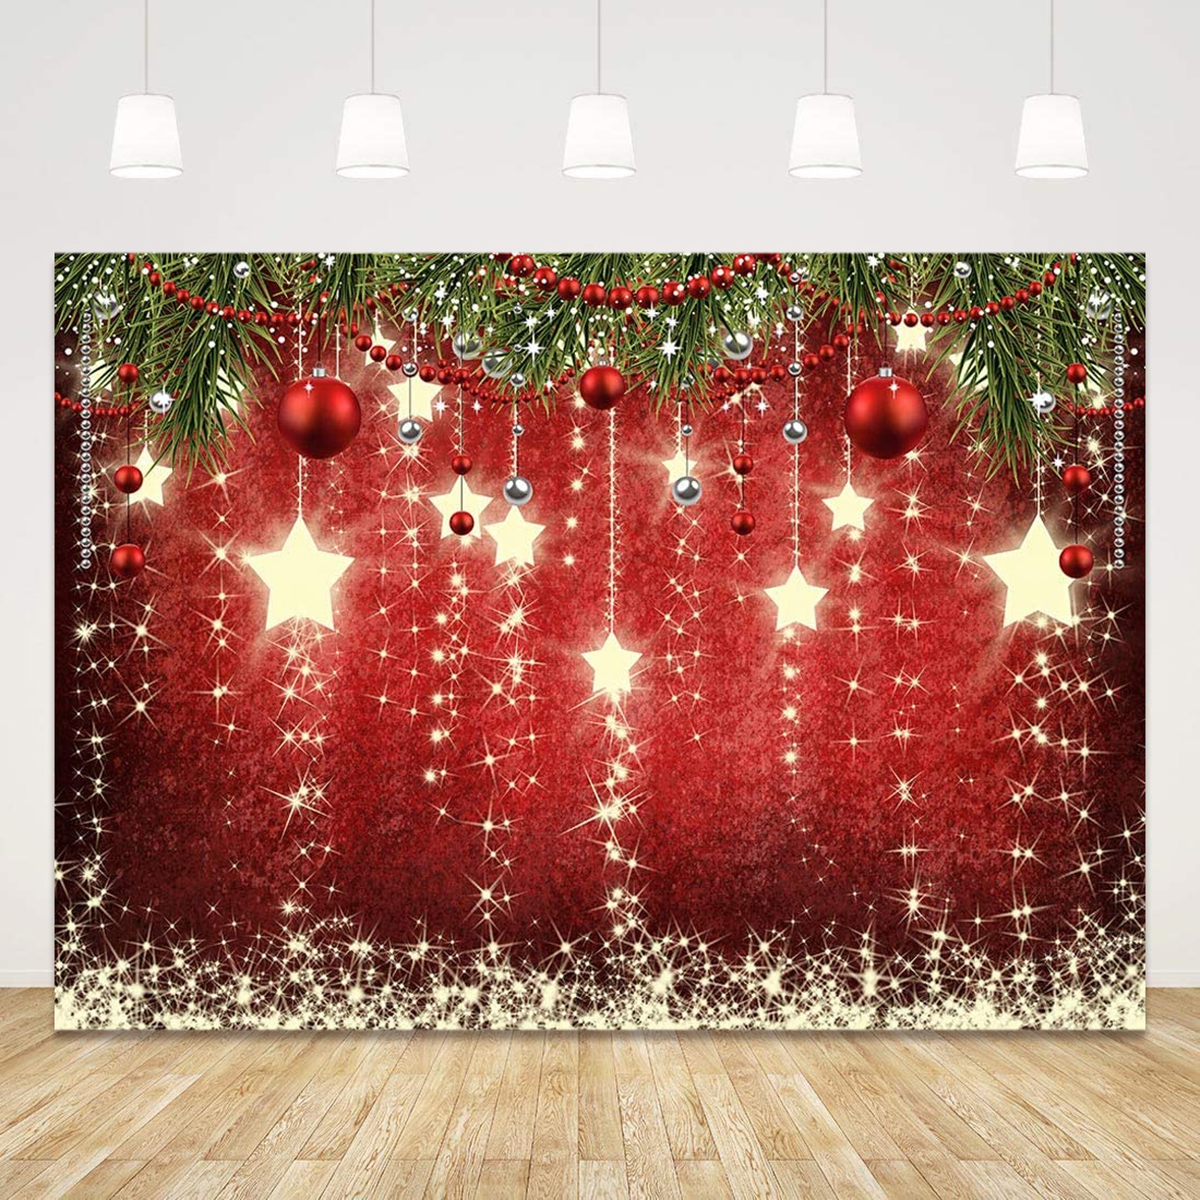 Christmas-Sparkling-Stars-Photography-Backdrop-Photo-Background-Studio-Props-Ornaments-New-Year-Back-1912685-10